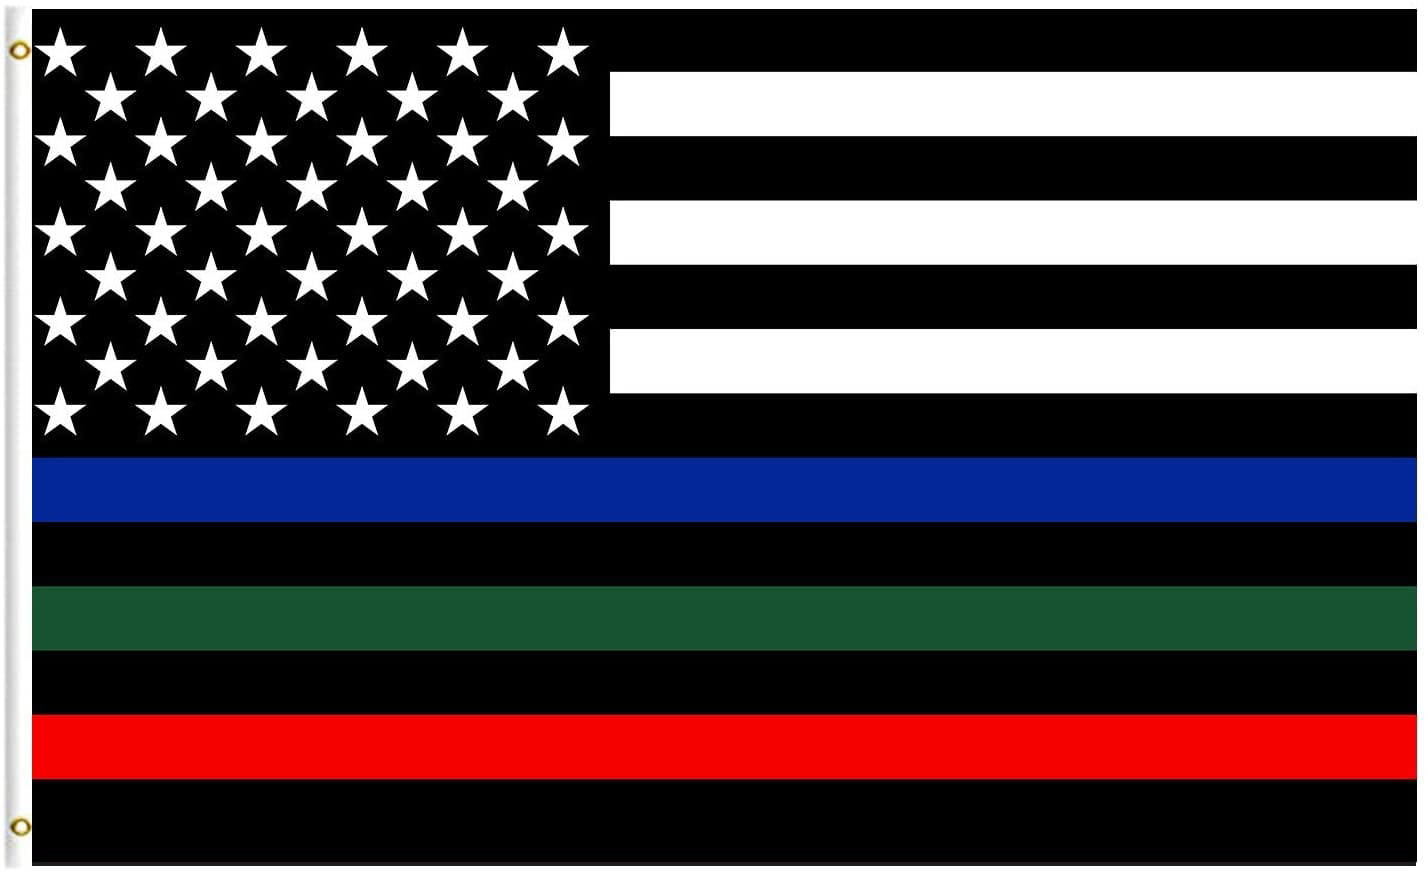 3x5ft USA Police Thin Blue Line Flag 3'x5' Memorial Law Enforcement OHyJu TyCbA 